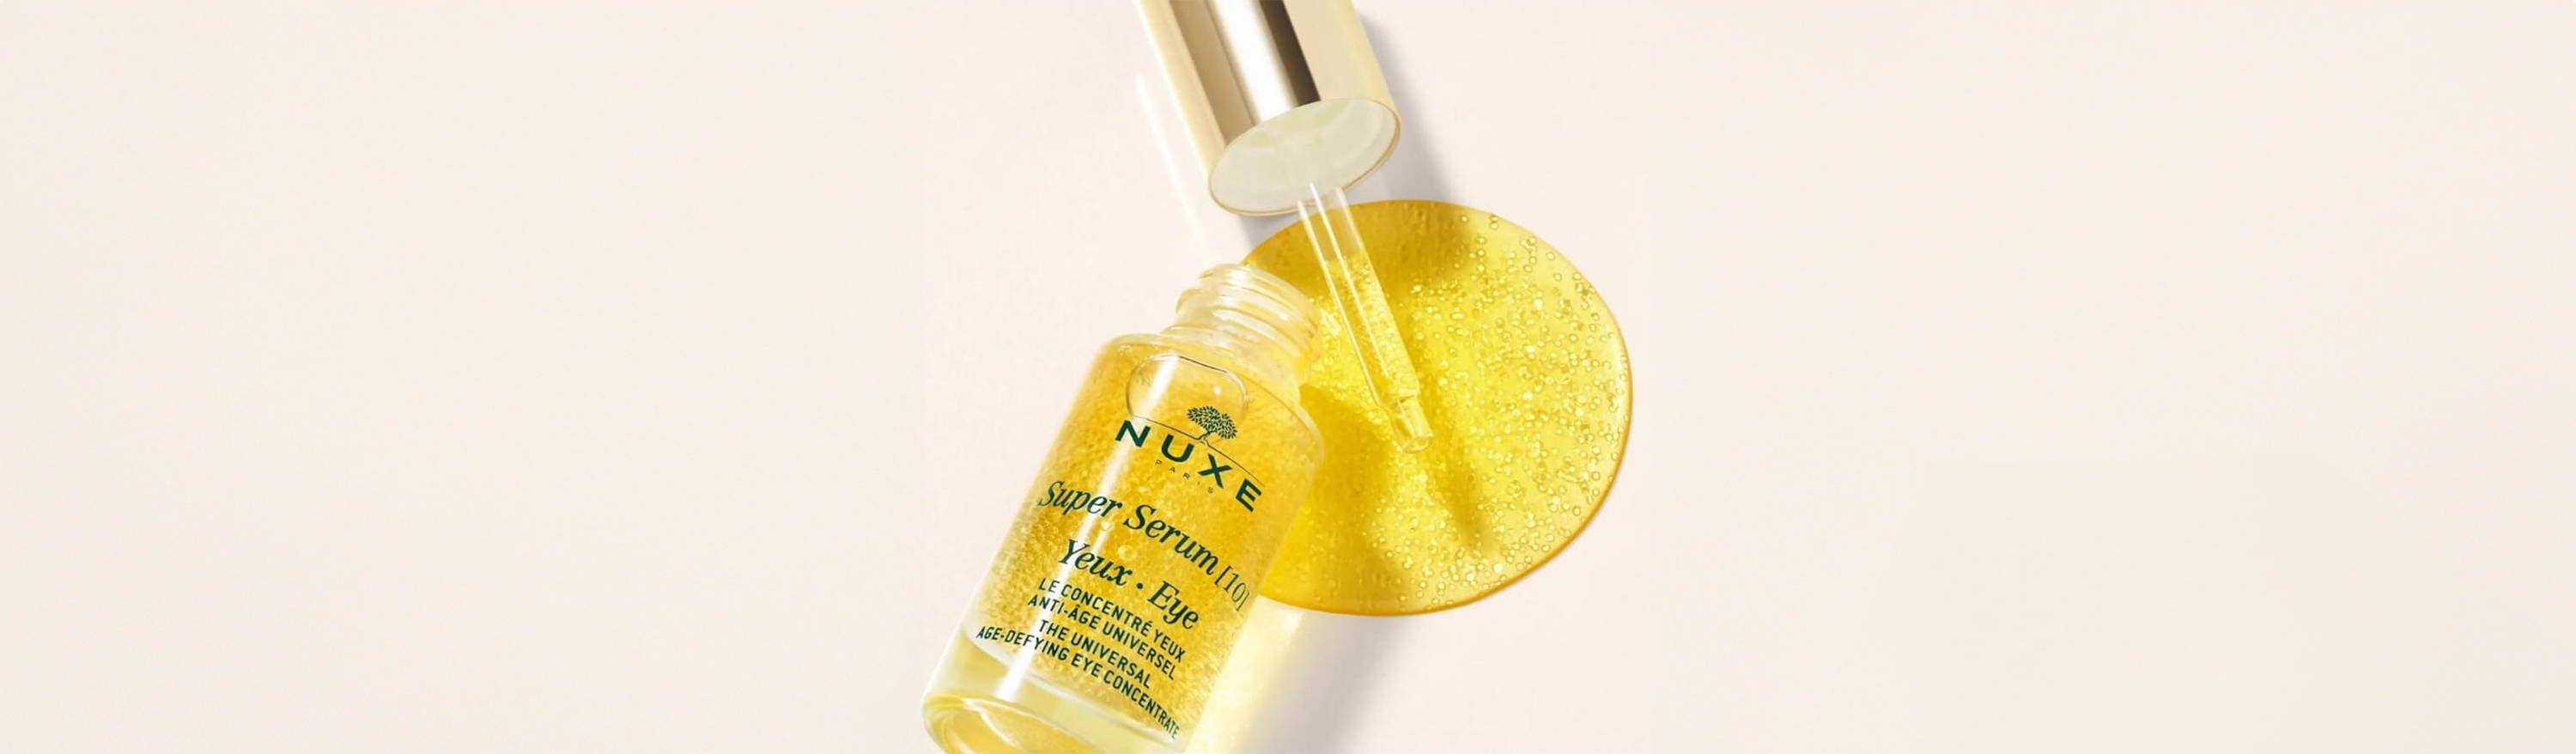 Unveiling Younger Eyes with Nuxe Super Serum [10] Eye